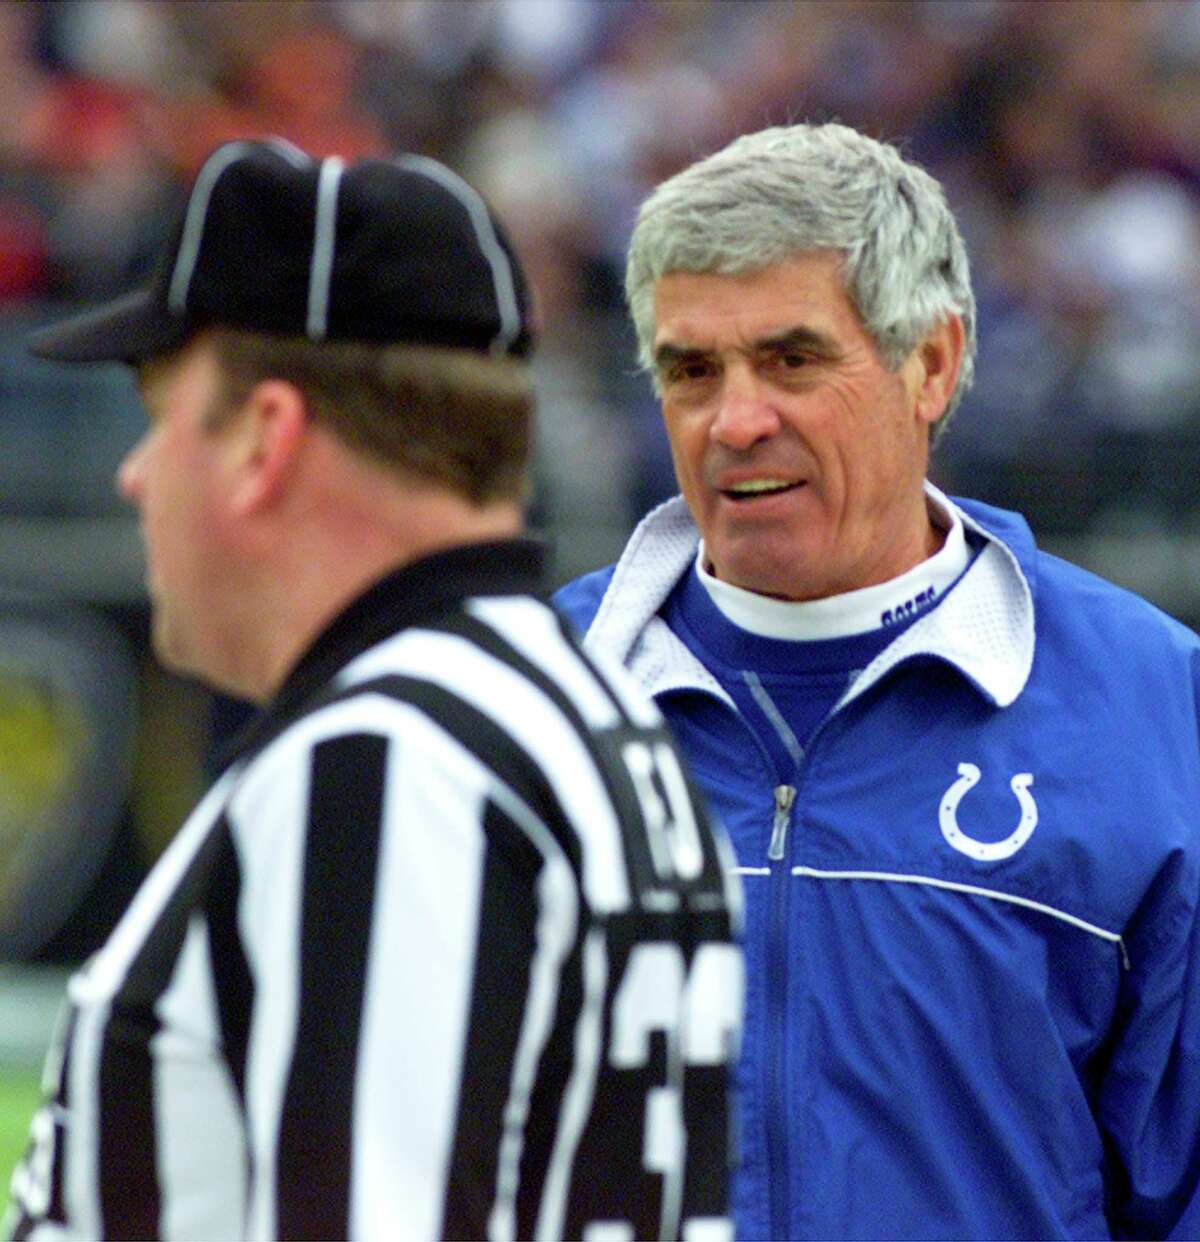 Indianapolis Colts coach Jim Mora, right, questions field judge Steve Zimmer about a call made in the Colts’ game against the Baltimore Ravens in 2001.